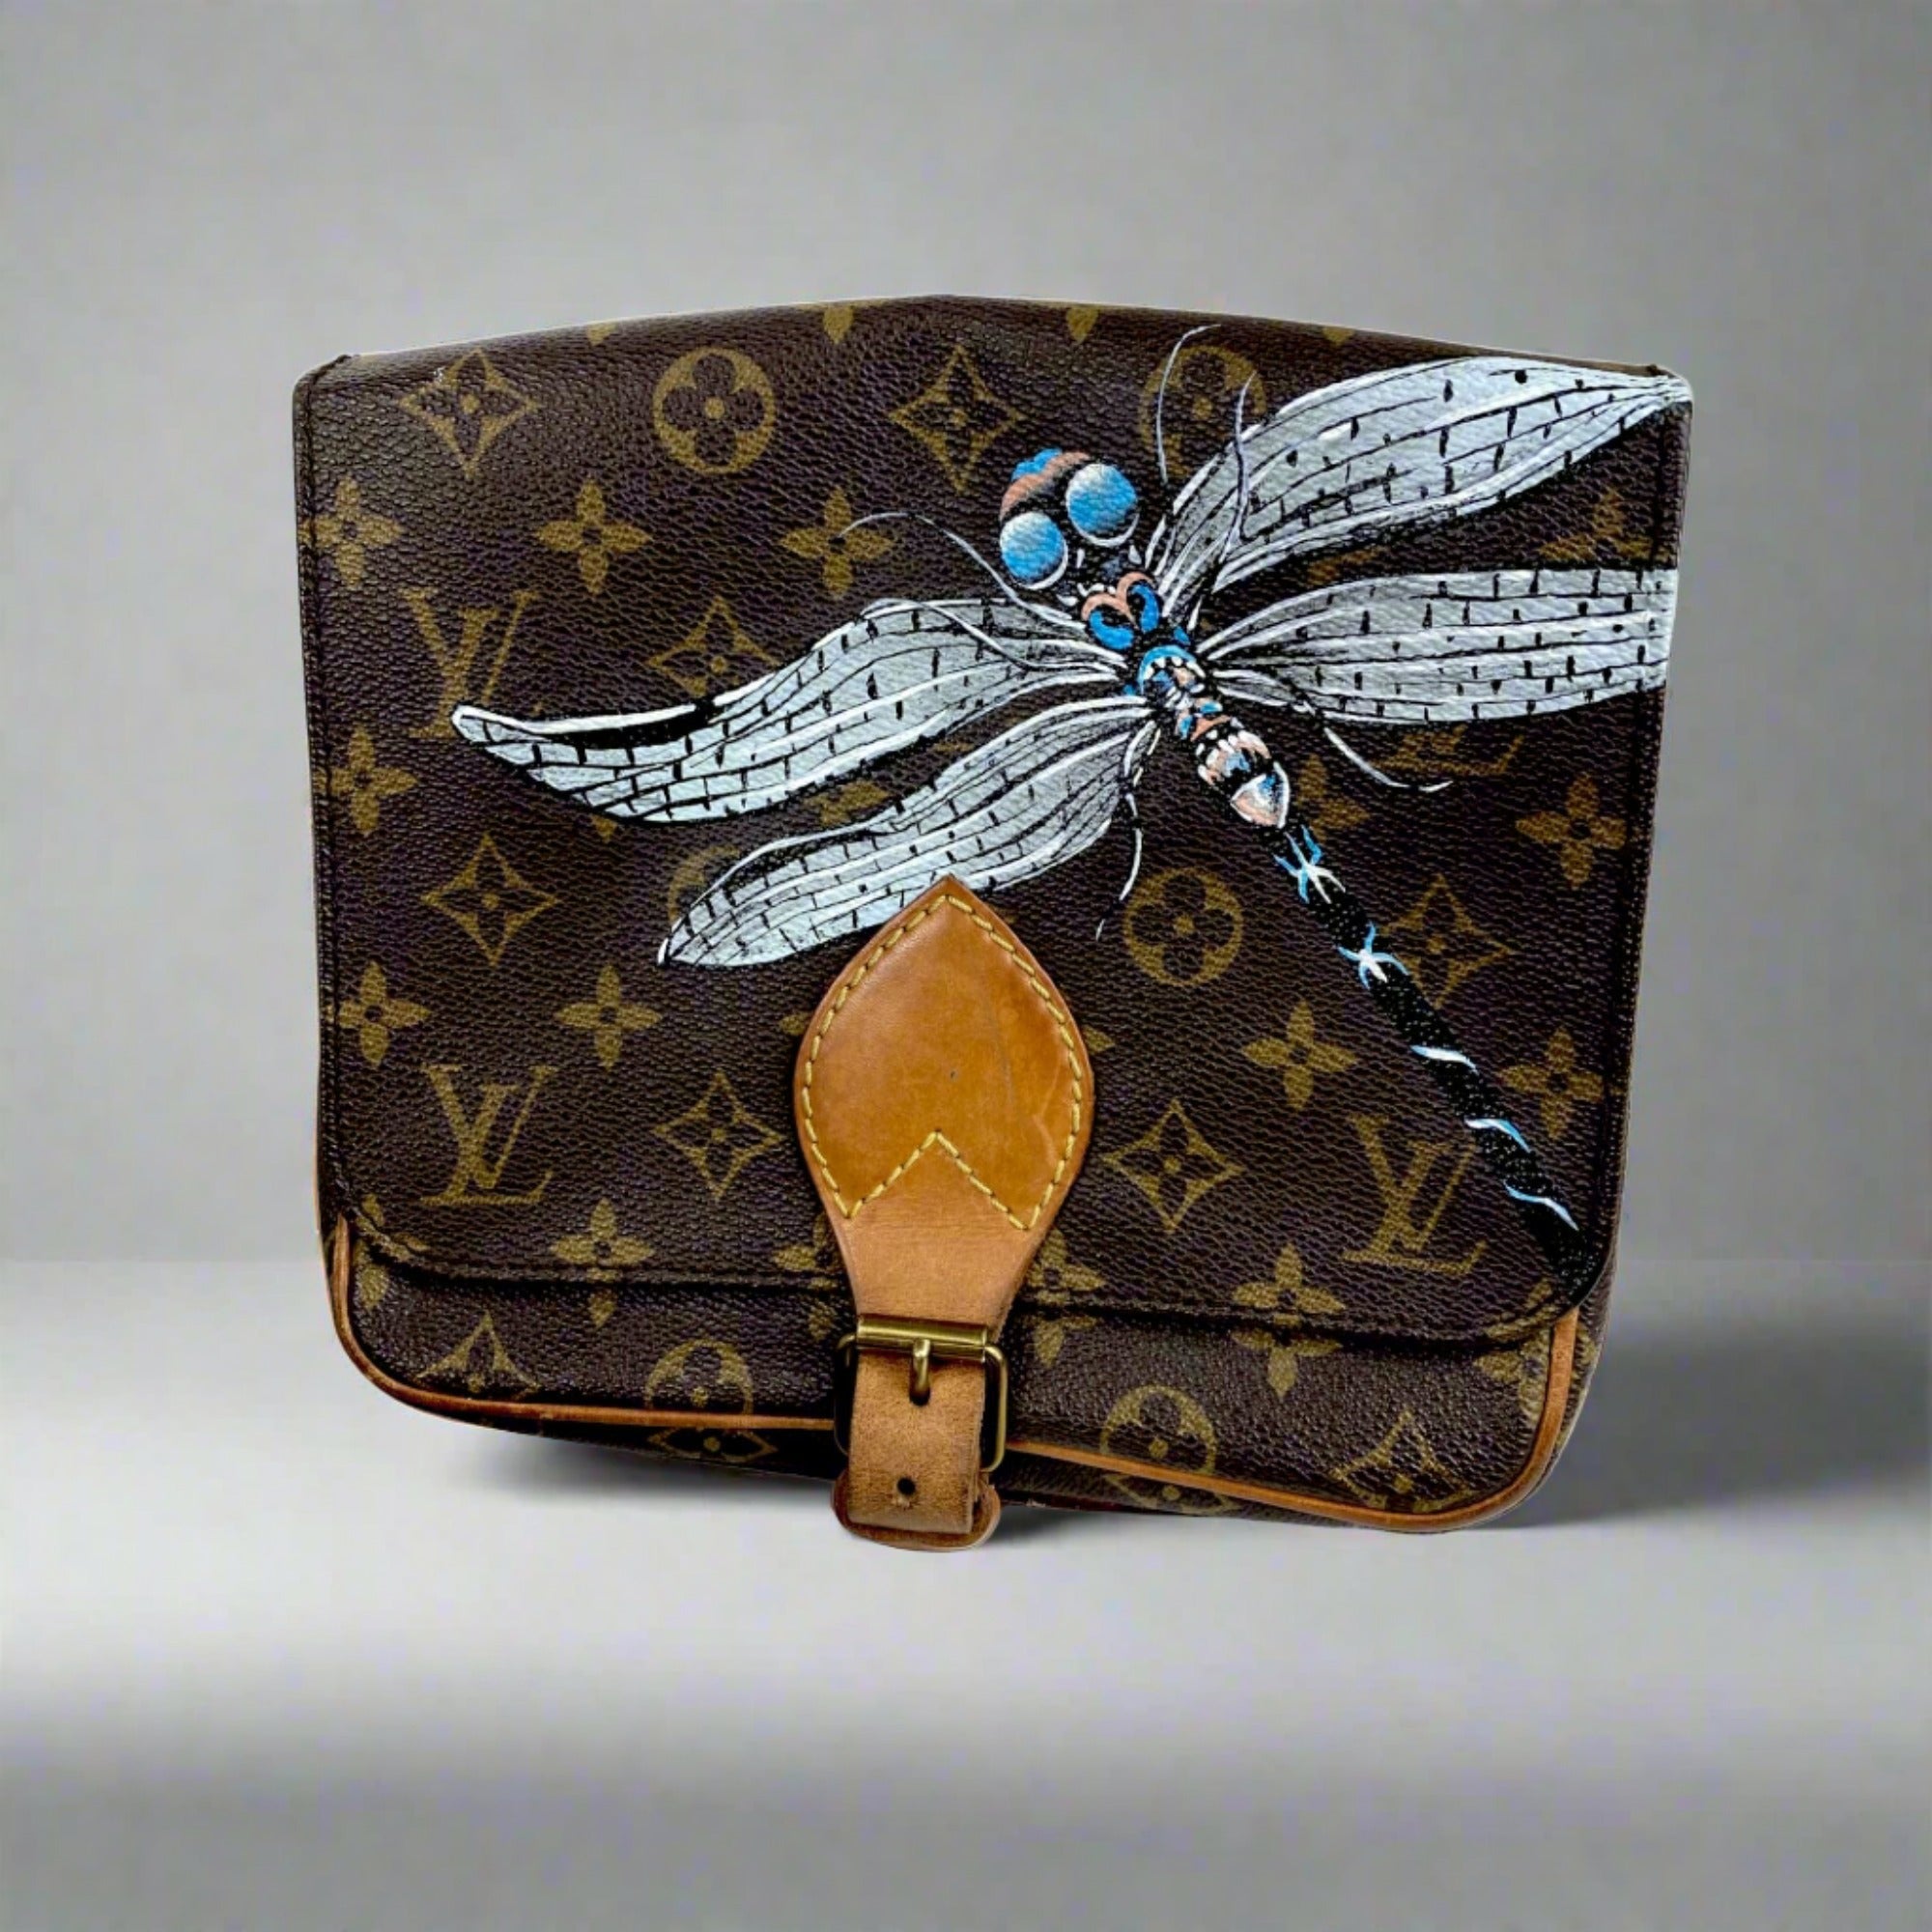 Not a F*ing Butterfly by New Vintage Handbags